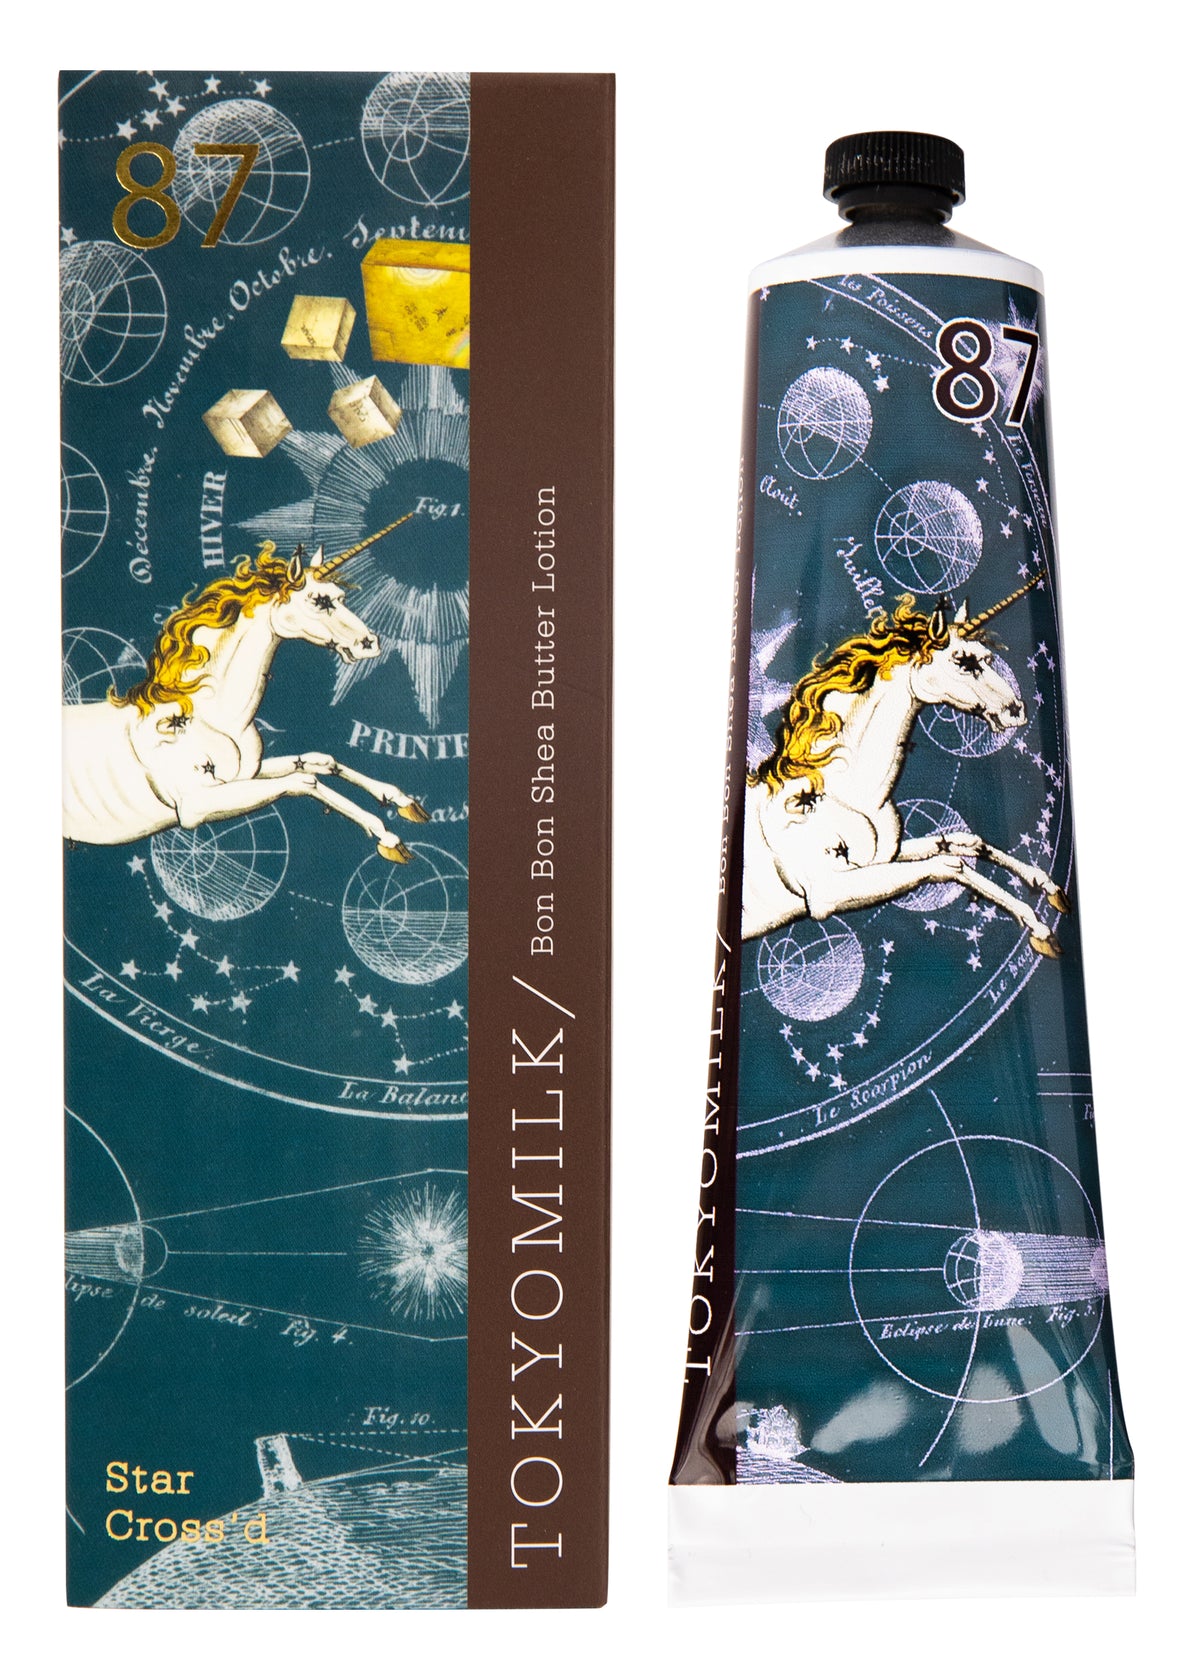 An image of Margot Elena's TokyoMilk Star Cross'd No. 87 Bon Bon Shea Butter Lotion in a uniquely designed tube and its matching box, both decorated with celestial graphics and a white unicorn, infused with shea butter.